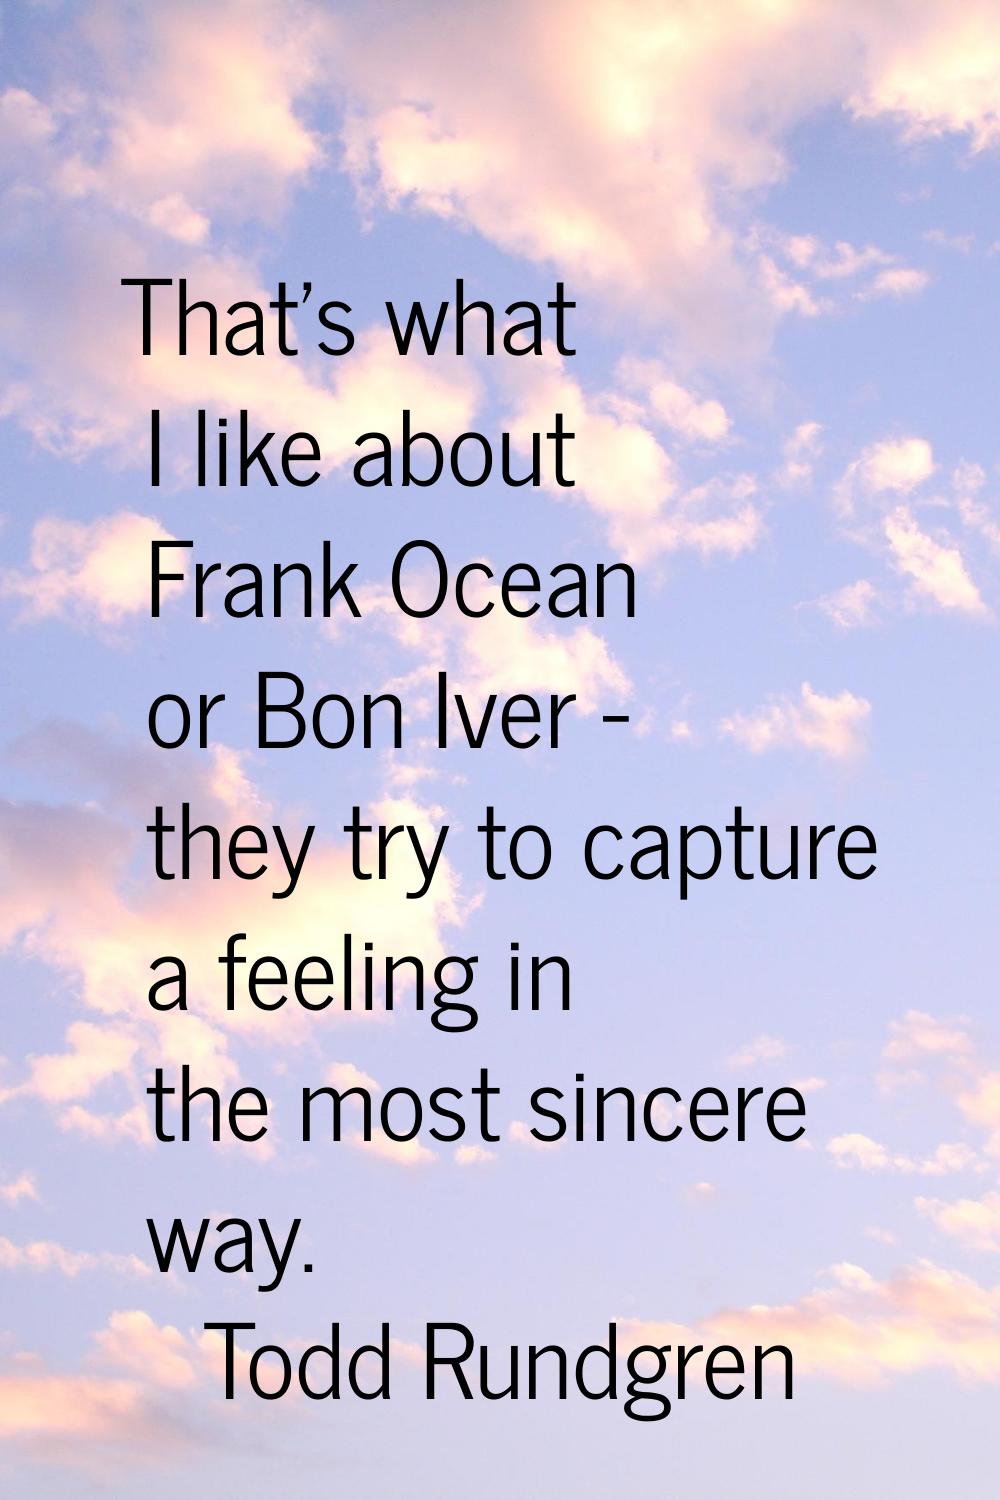 That's what I like about Frank Ocean or Bon Iver - they try to capture a feeling in the most sincer